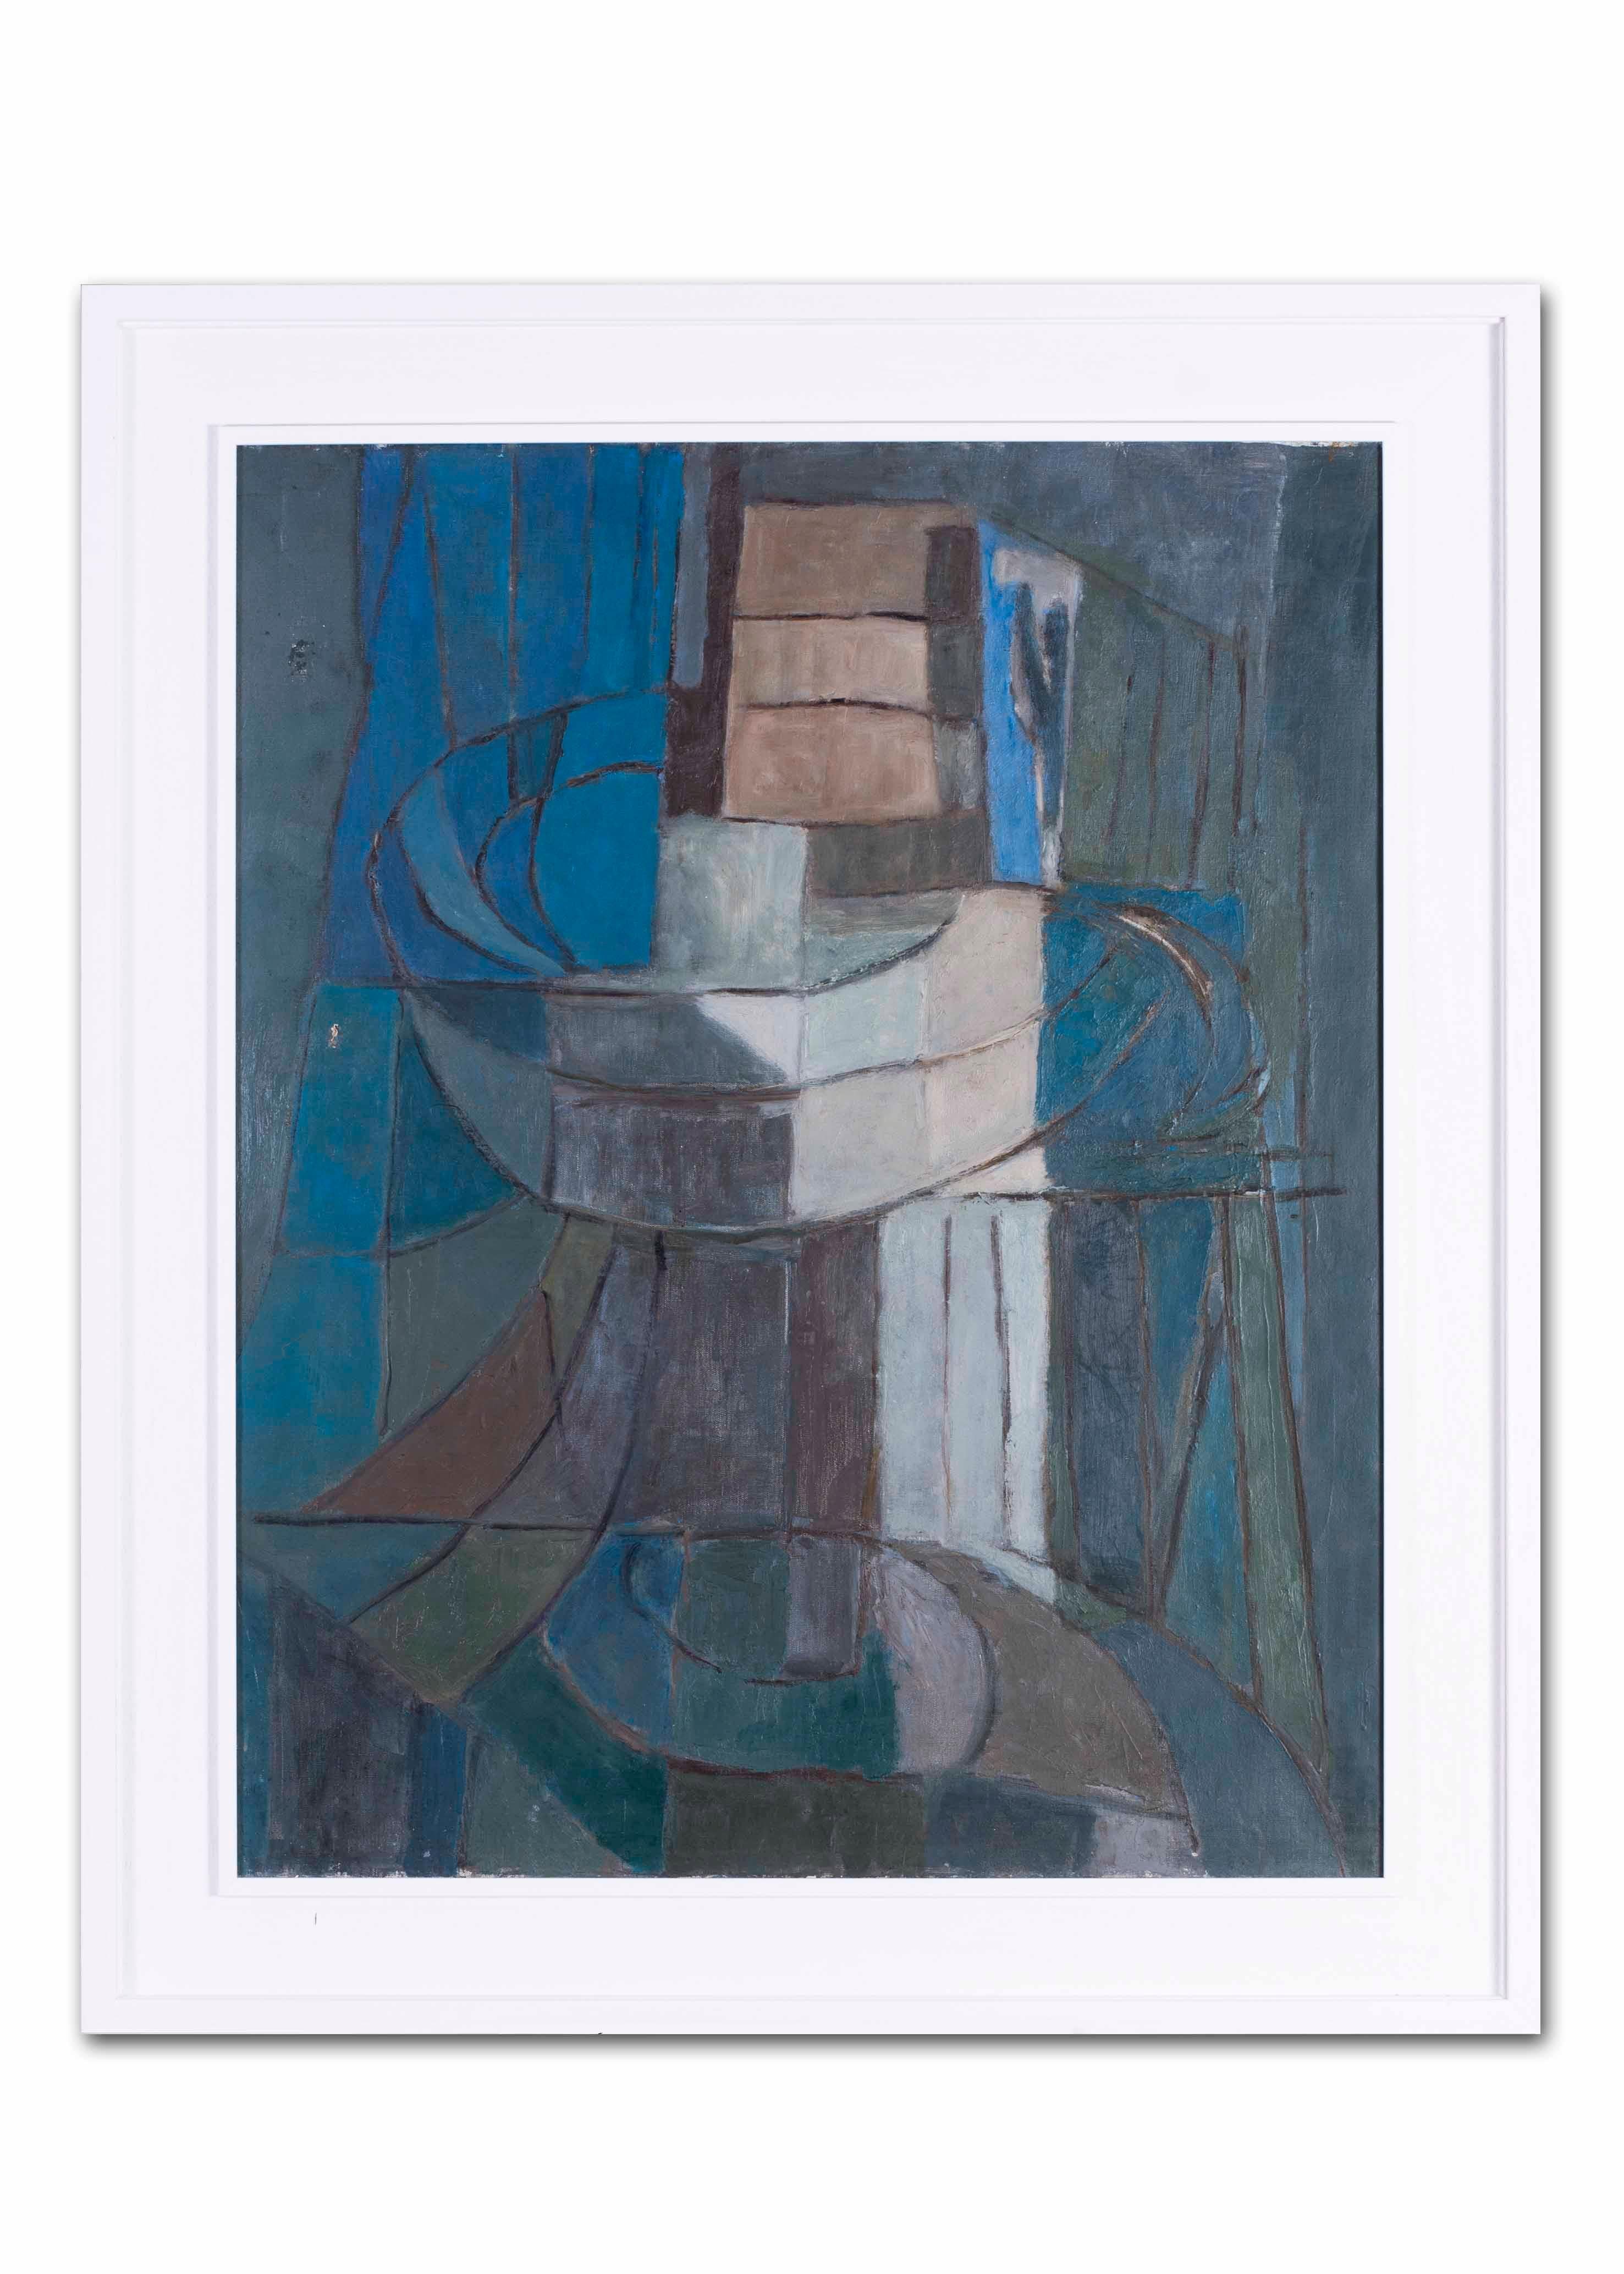 Mid 20th Century French abstract painting 'Abstract in blue, green and grey' - Painting by Henri d’Amfreville